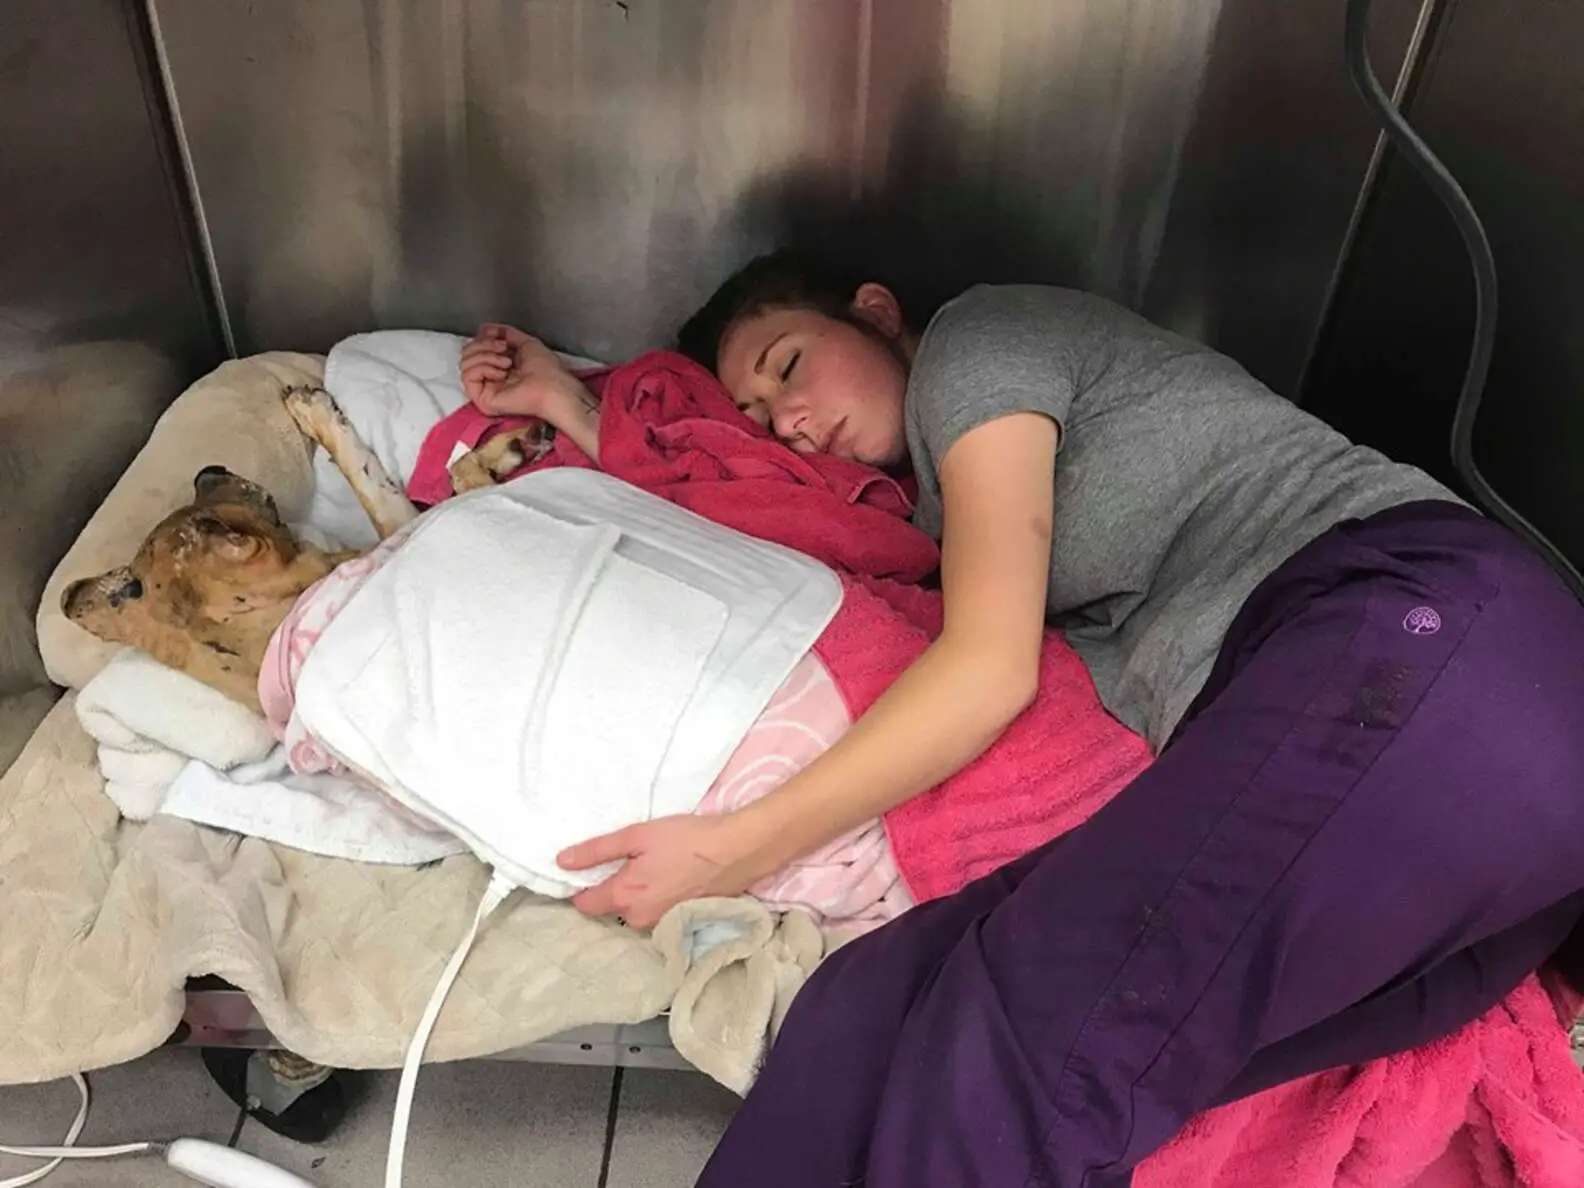 Emily, exhausted from caring for Taka all night, took a break at work and fell asleep next to him in his kennel. A coworker captured a touching photo of the moment.